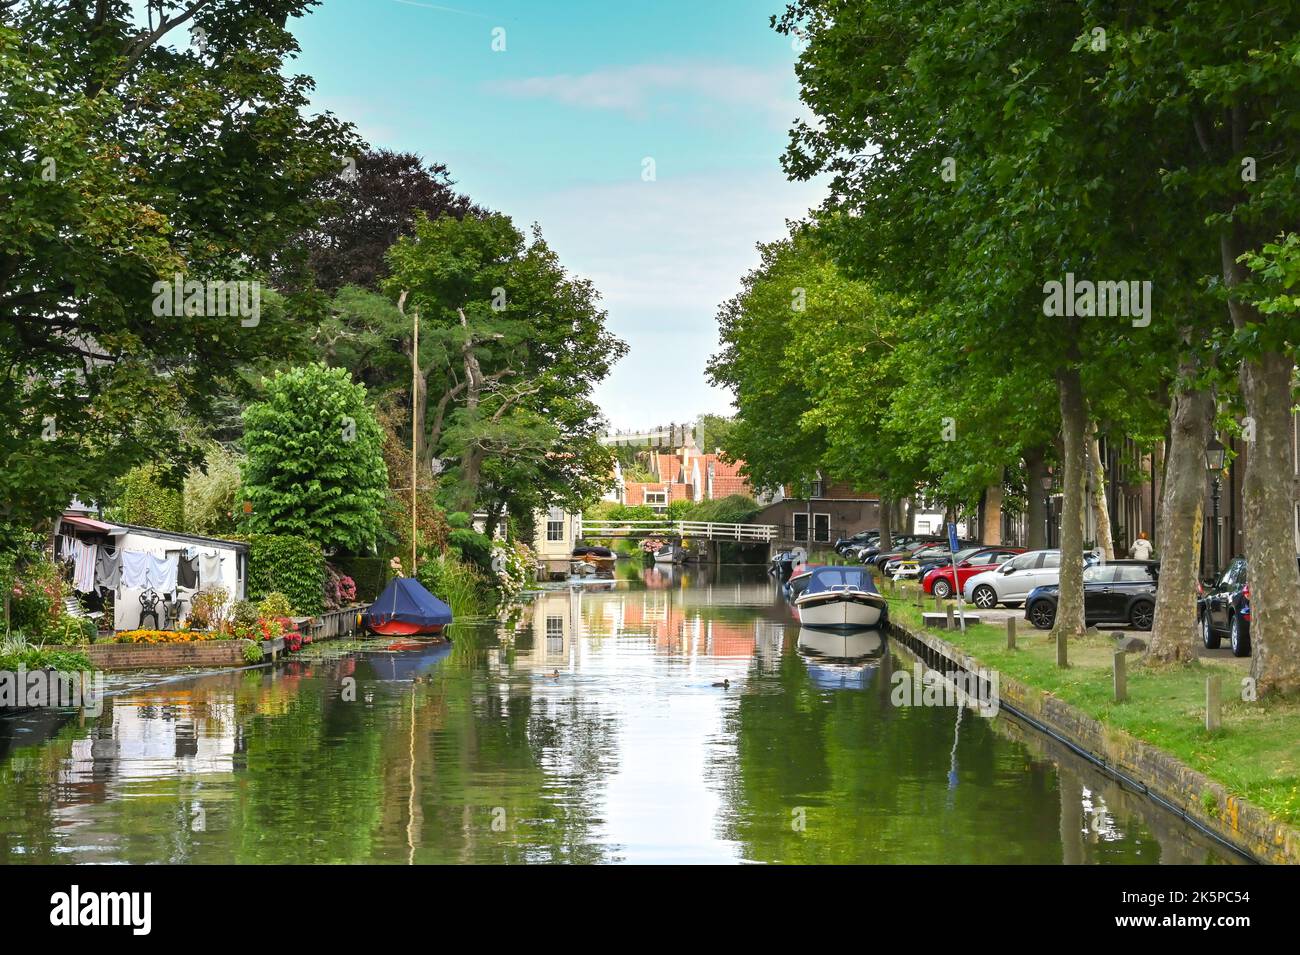 Zaandam, Netherlands - August 2022: Boats on a treelined canal in the Dutch town of Edam, which is famous for its cheese. Stock Photo